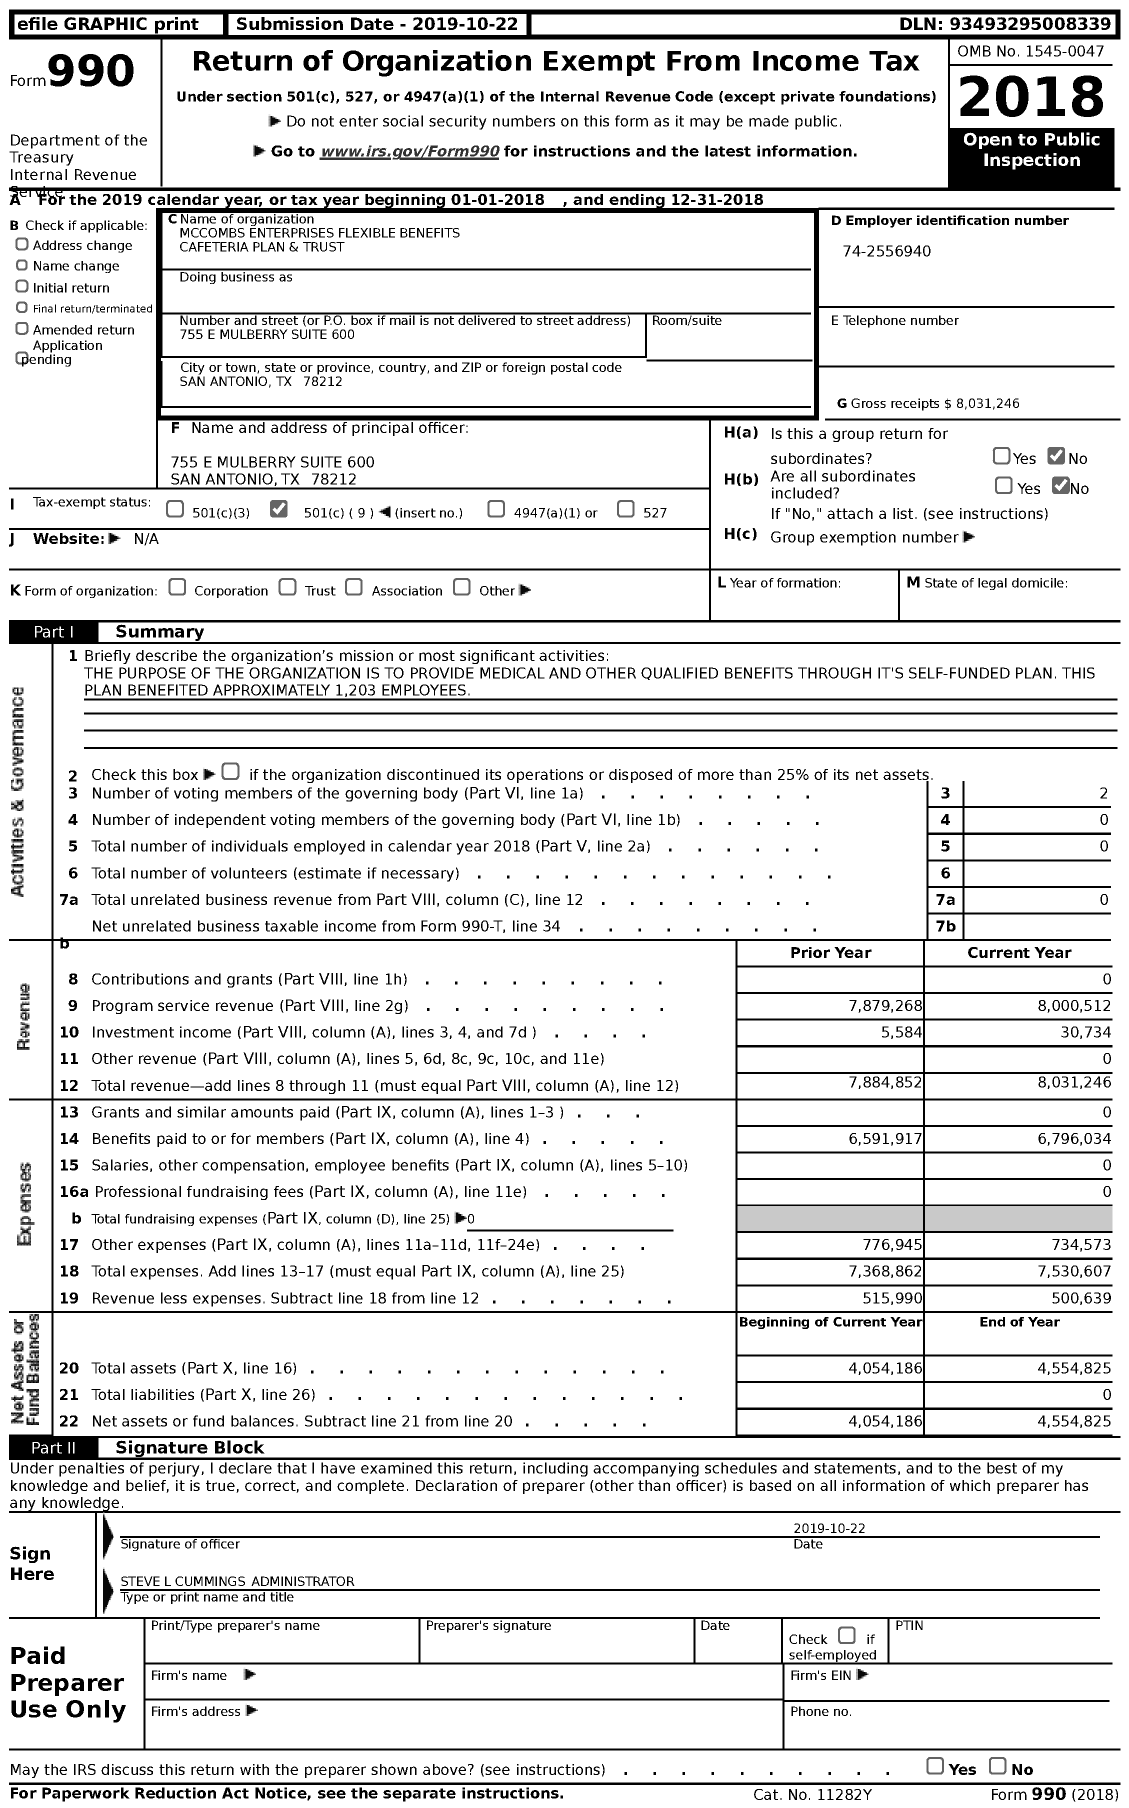 Image of first page of 2018 Form 990 for Mccombs Enterprises Flexible Benefits Cafeteria Plan and Trust